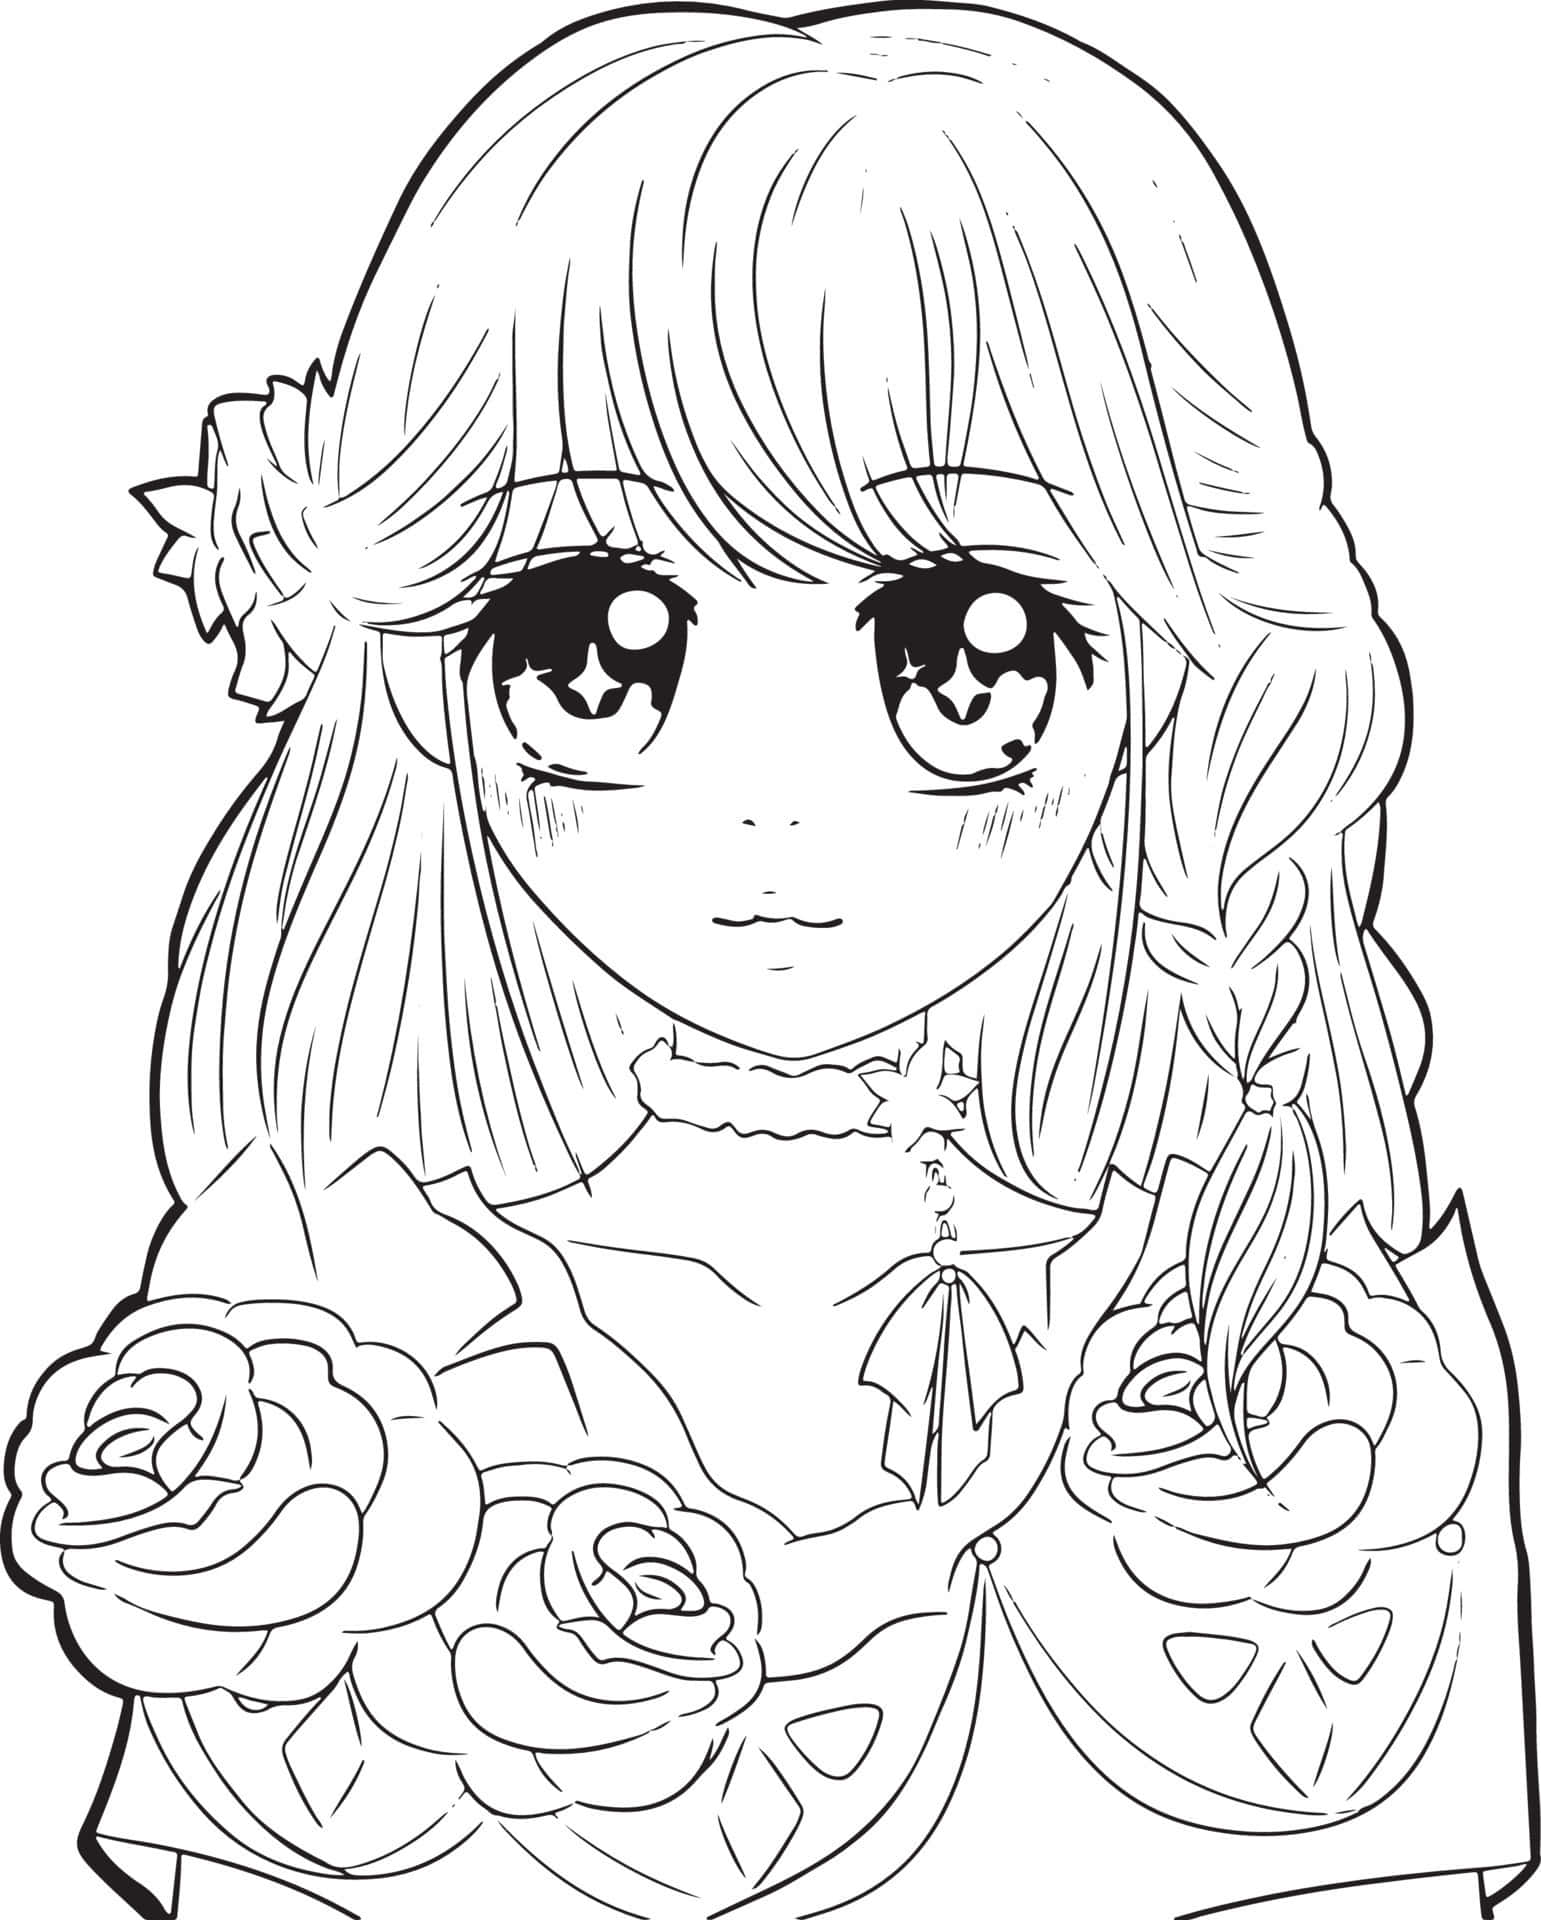 10 Free Anime Coloring Pages Thatll Turn You Into An Otaku